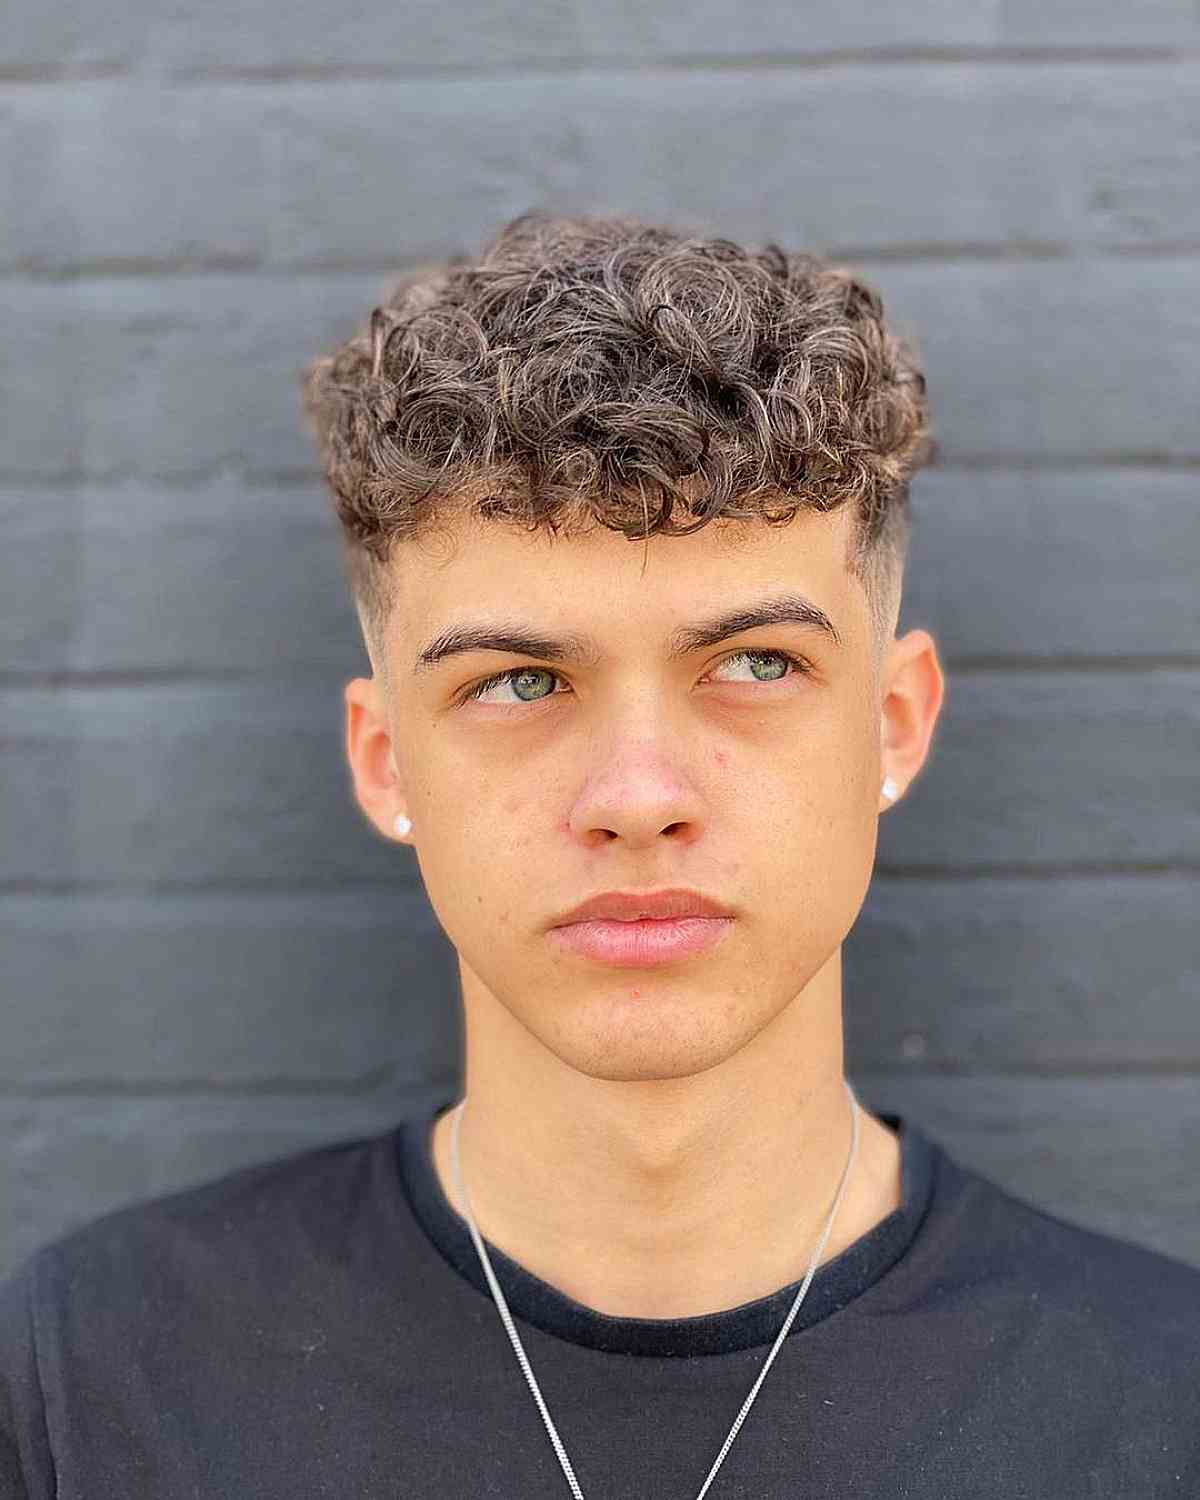 104 Of The Best Curly Hairstyles For Men (Haircut Ideas)